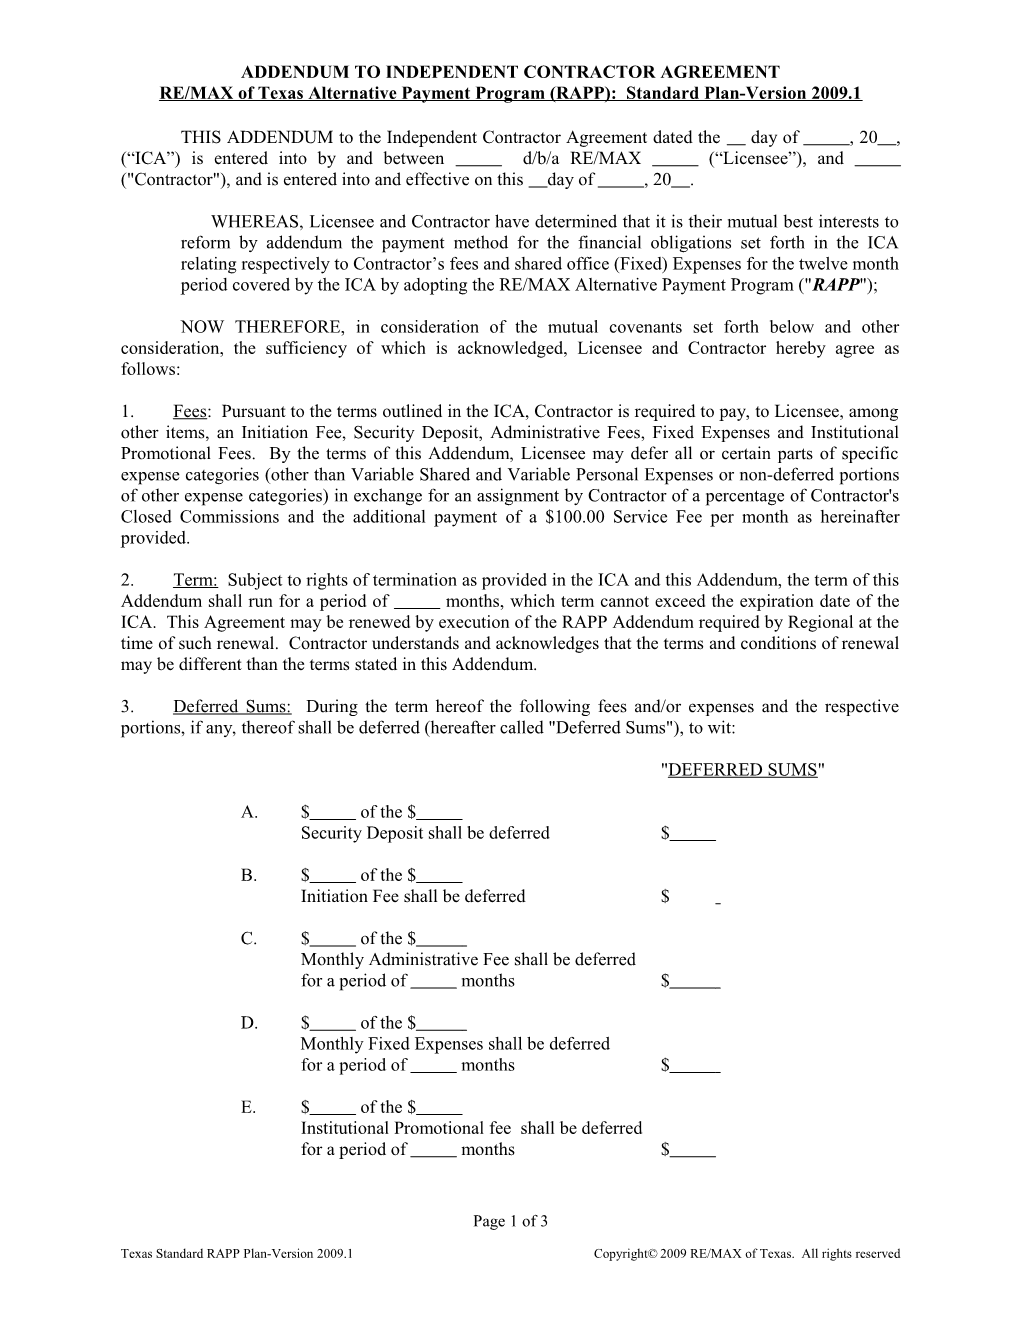 THIS ADDENDUM to the Independent Contractor Agreement Dated the ______ Day of ______, 20___